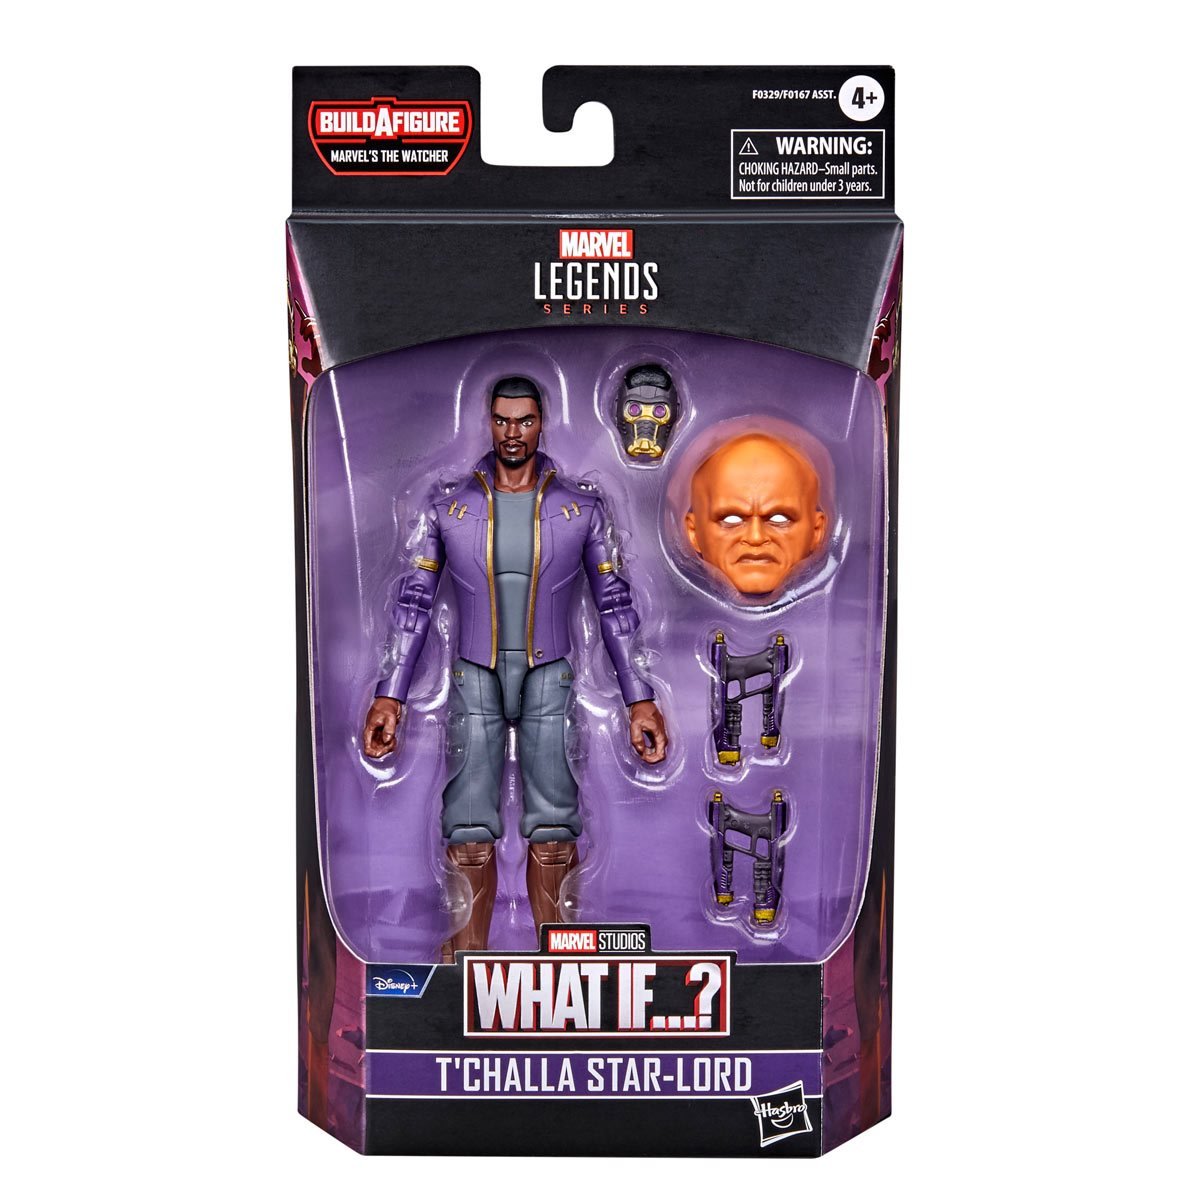 Marvel Legends What If? T'Challa Star-Lord Action Figure